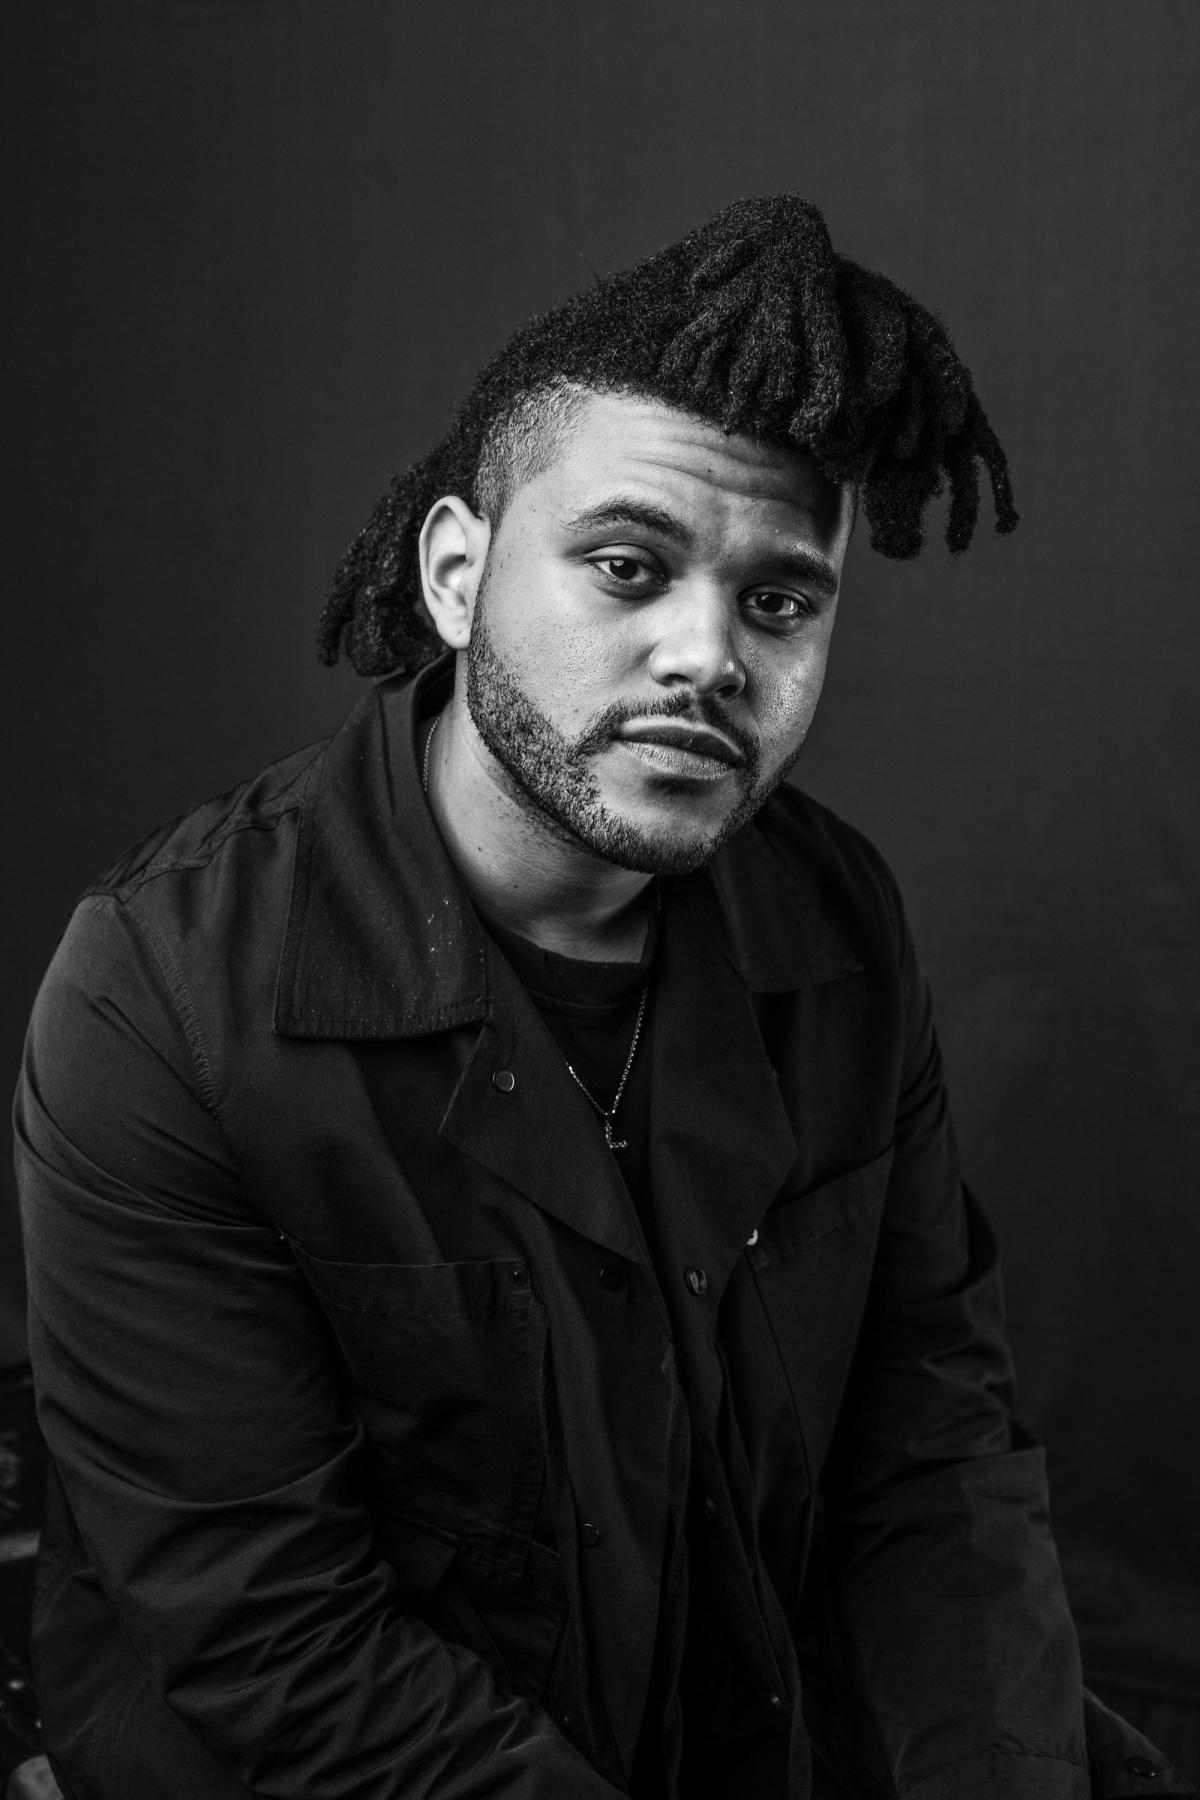 Weekend photo. The Weeknd. Певец the Weeknd. Abel the Weeknd. The Weeknd фото.